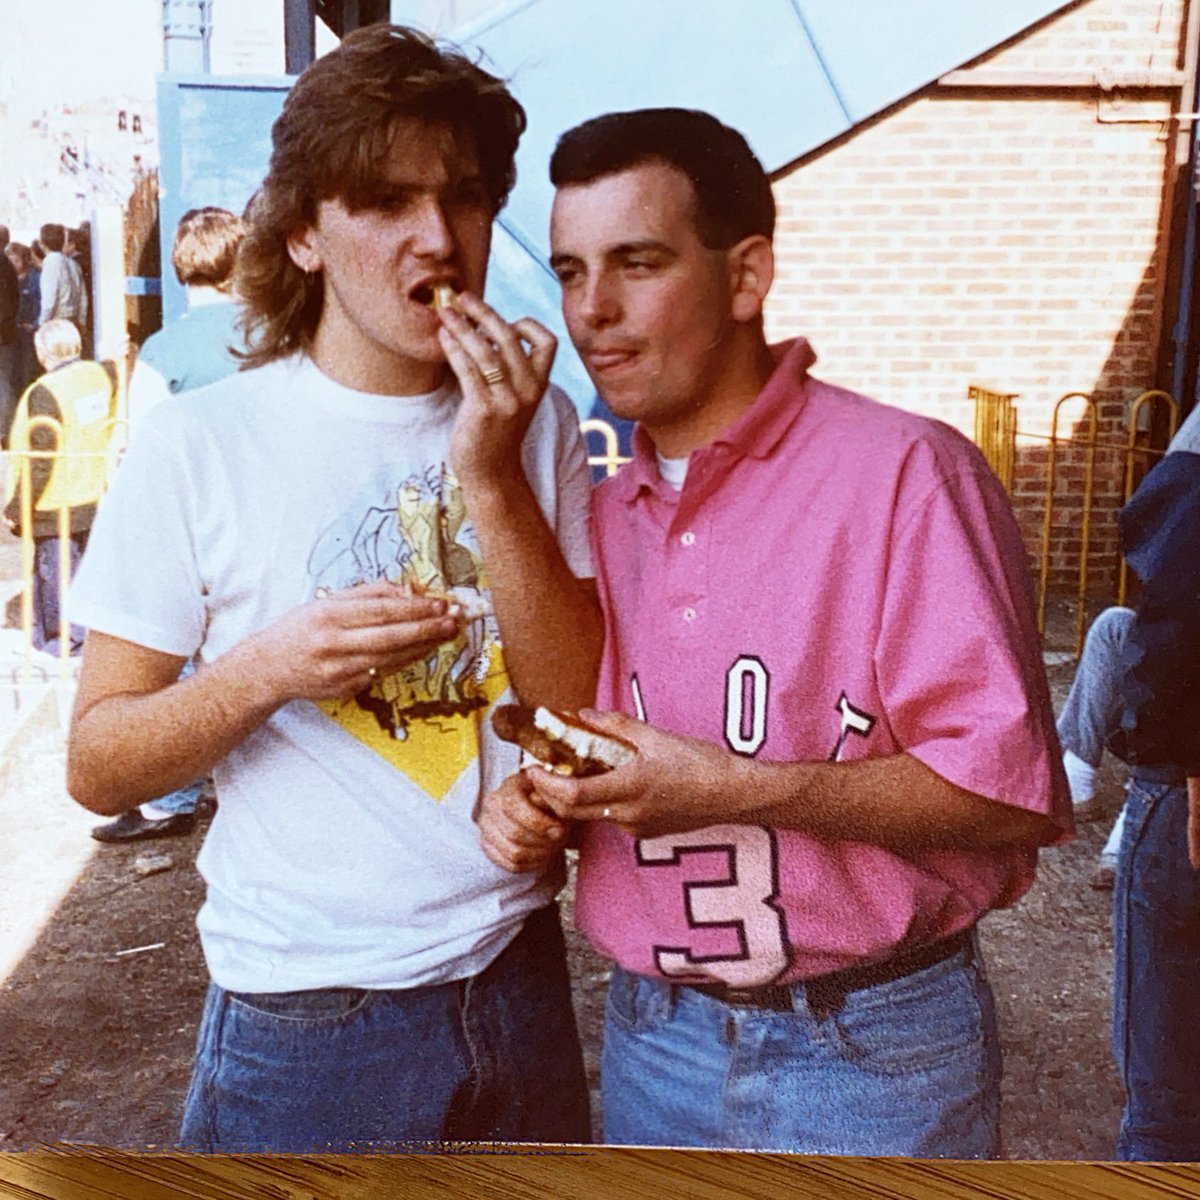 The food wasn’t great. But nowhere in the mid 80s was. Pizzaland was as continental as it got. Here’s me (with my pal Ian who the cabby wouldn’t drop me off with) enjoying the veggie option - a roll with ketchup.